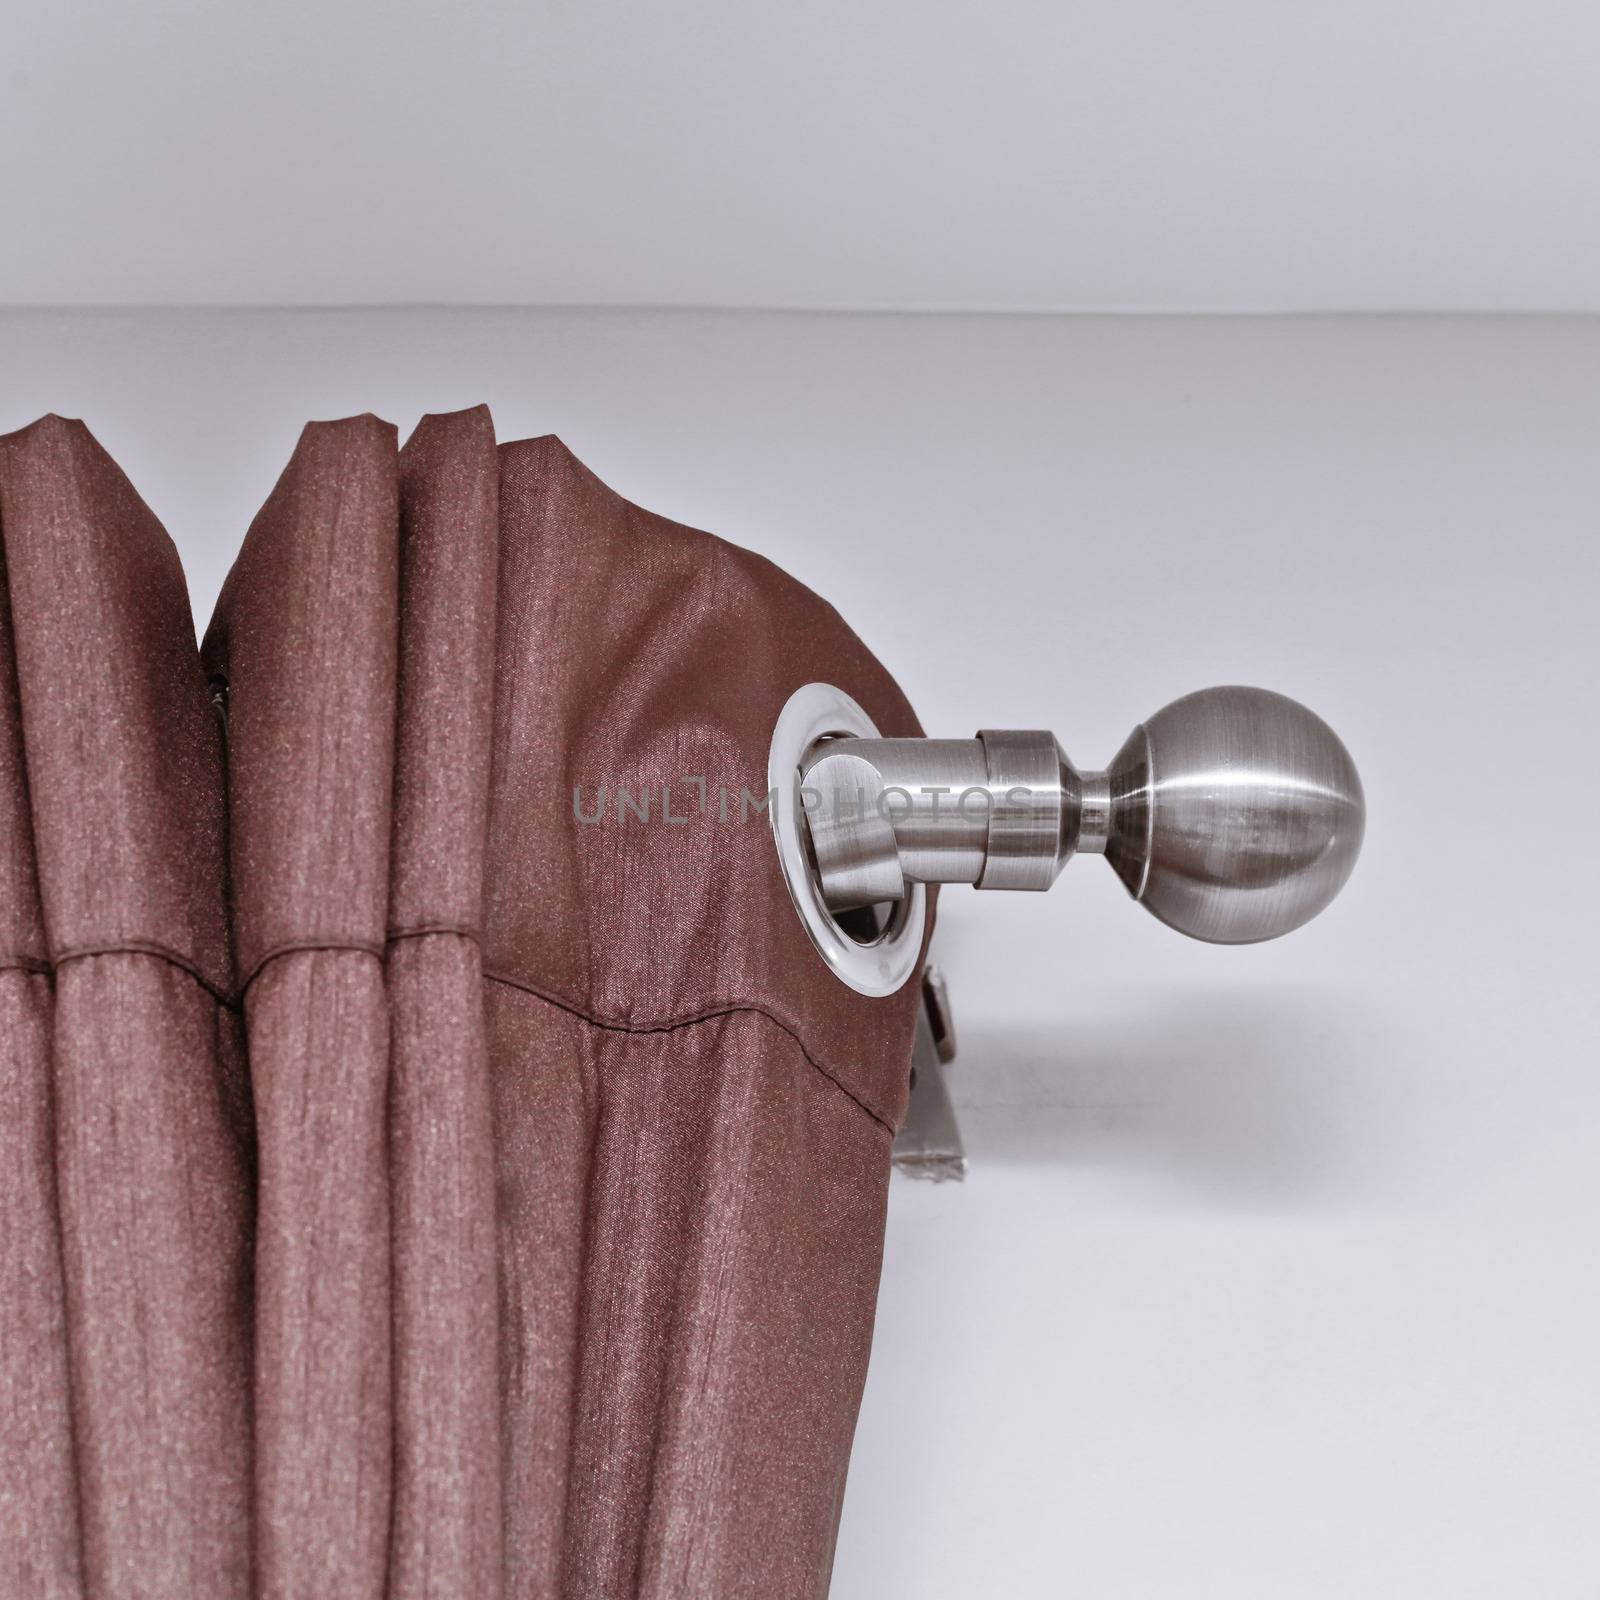 End of a metal curtain pole with a brown curtain